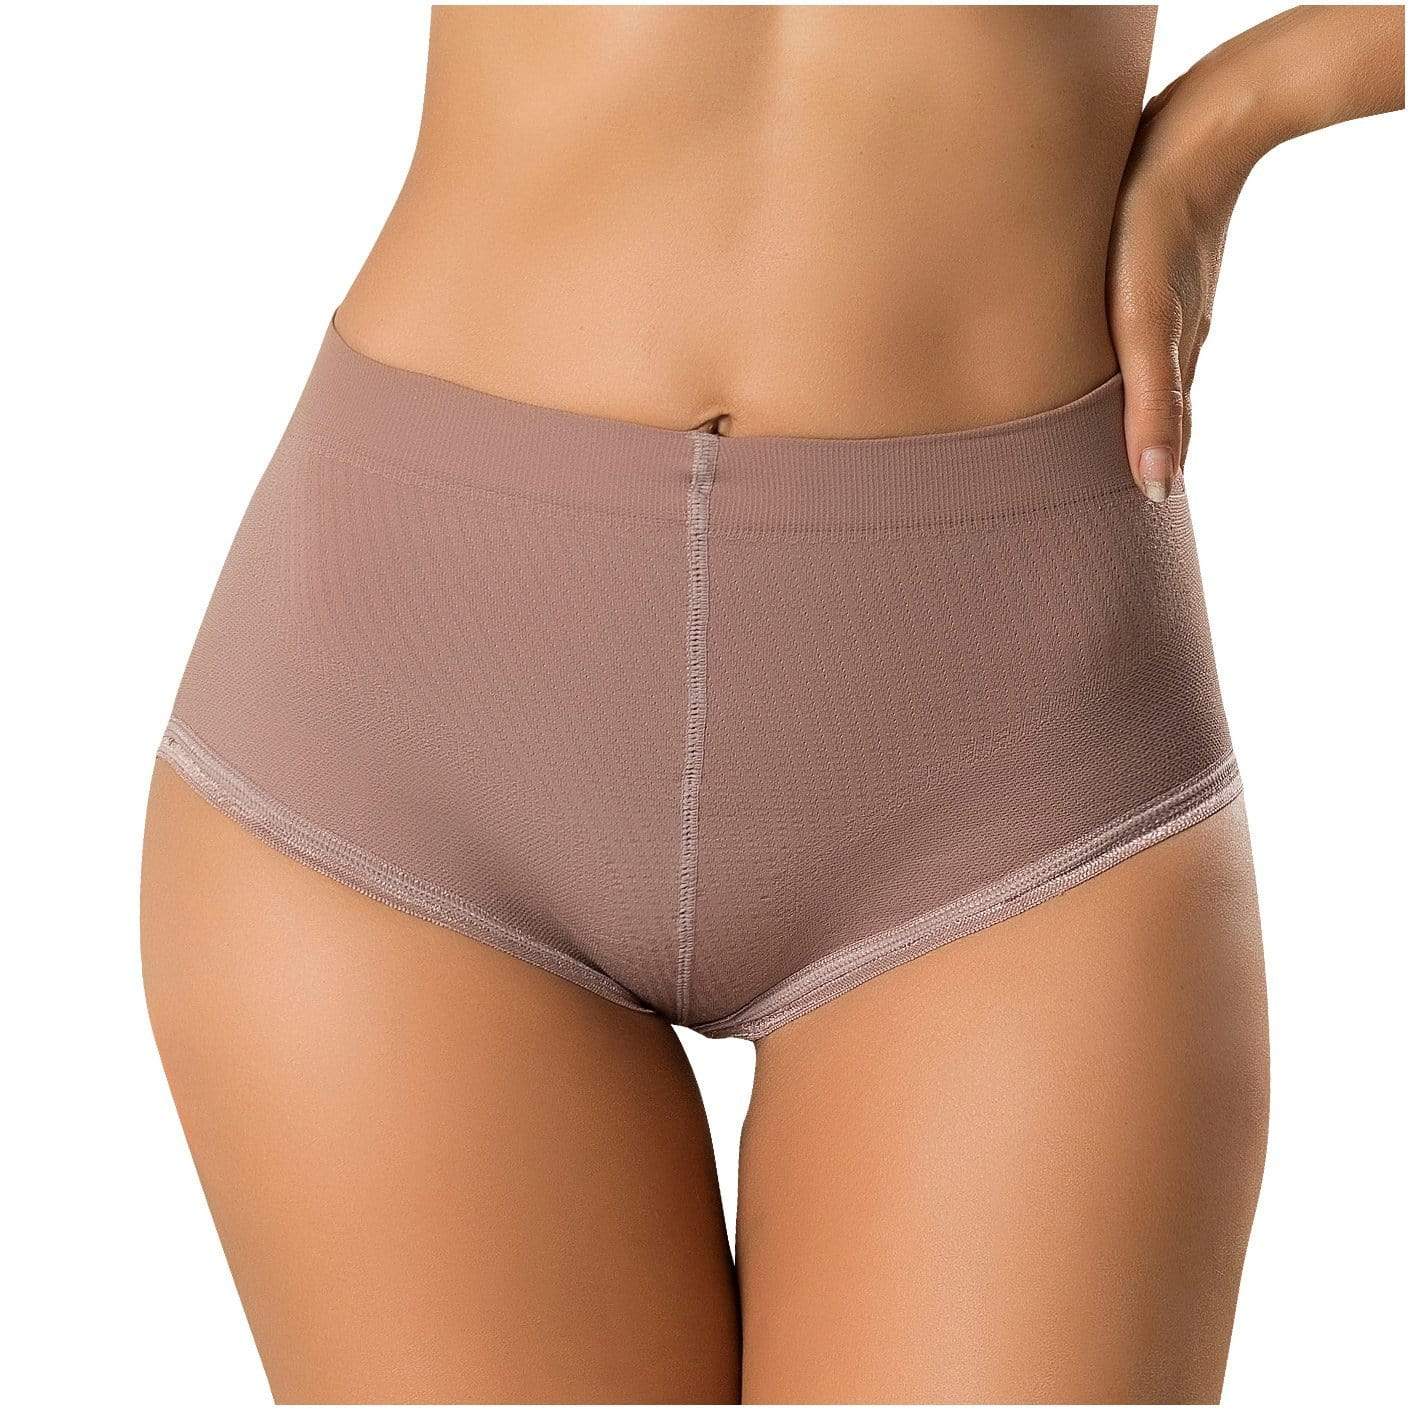 LT.ROSE 21896 Calzones Levanta Gluteos Colombianos Butt Lifter